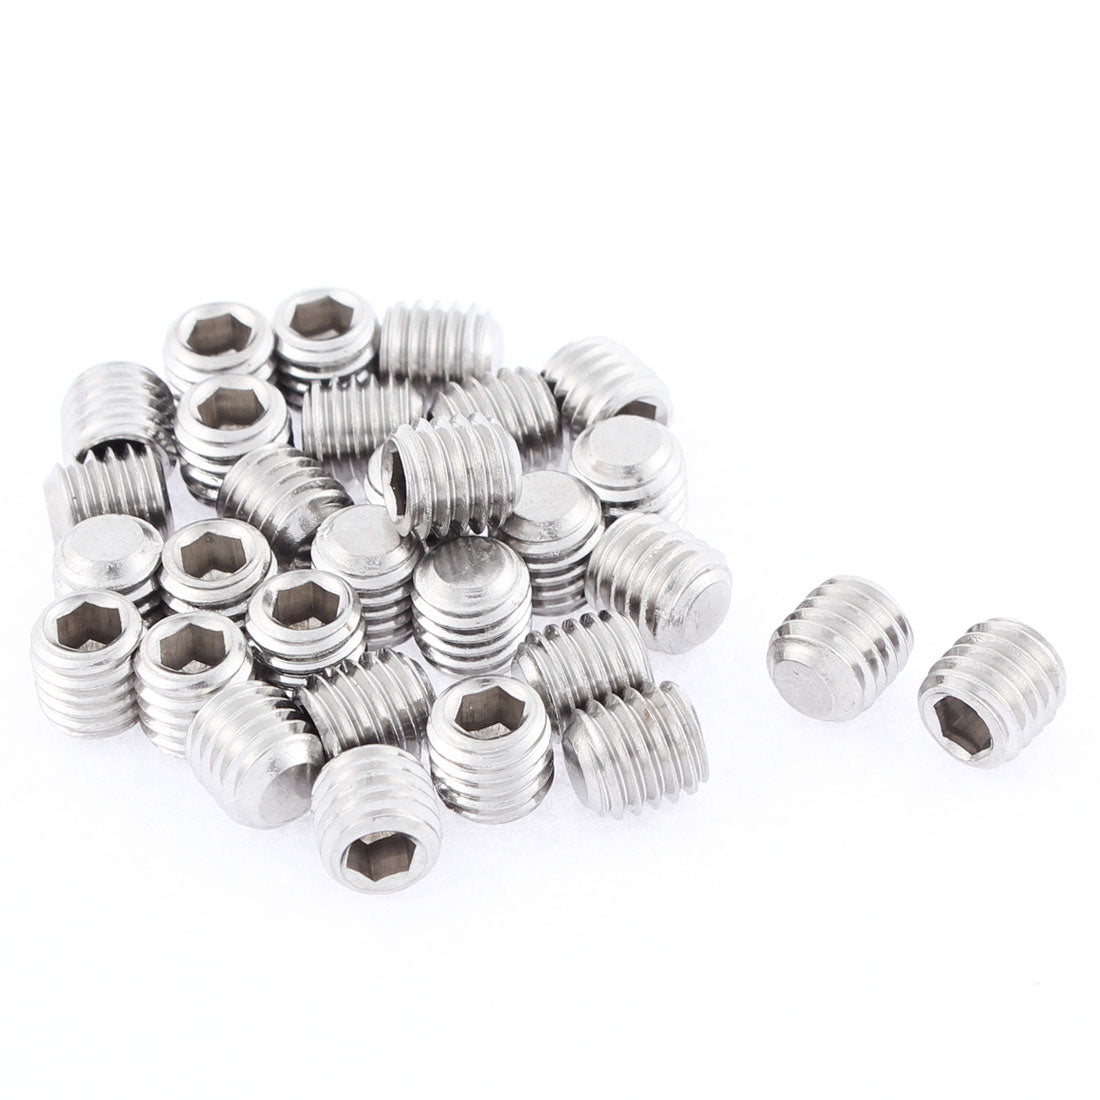 uxcell Uxcell M8x8mm 1.25mm Pitch Stainless Steel Hex Socket Set Flat Point Grub Screws 30pcs